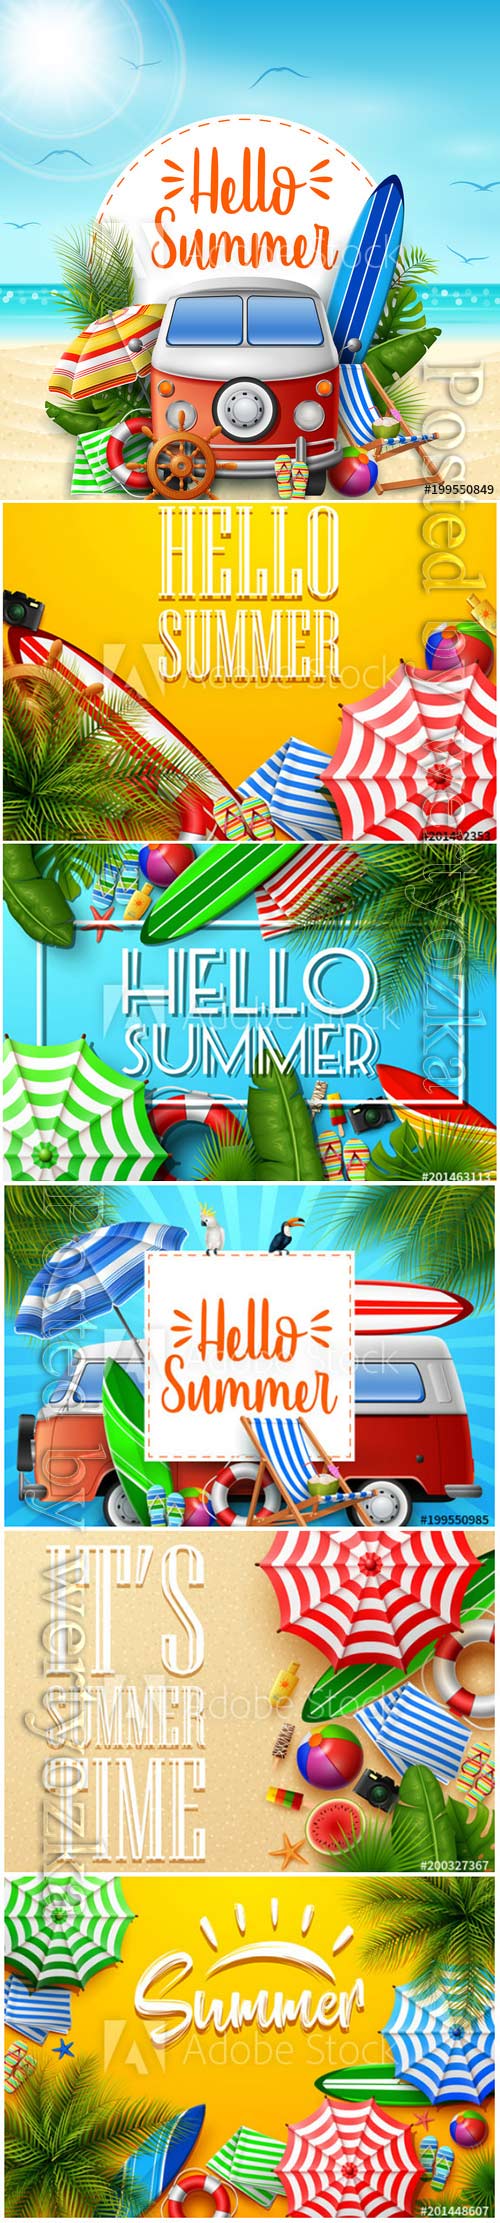 Hello summer vector banner, tropical leaves and beach element collections